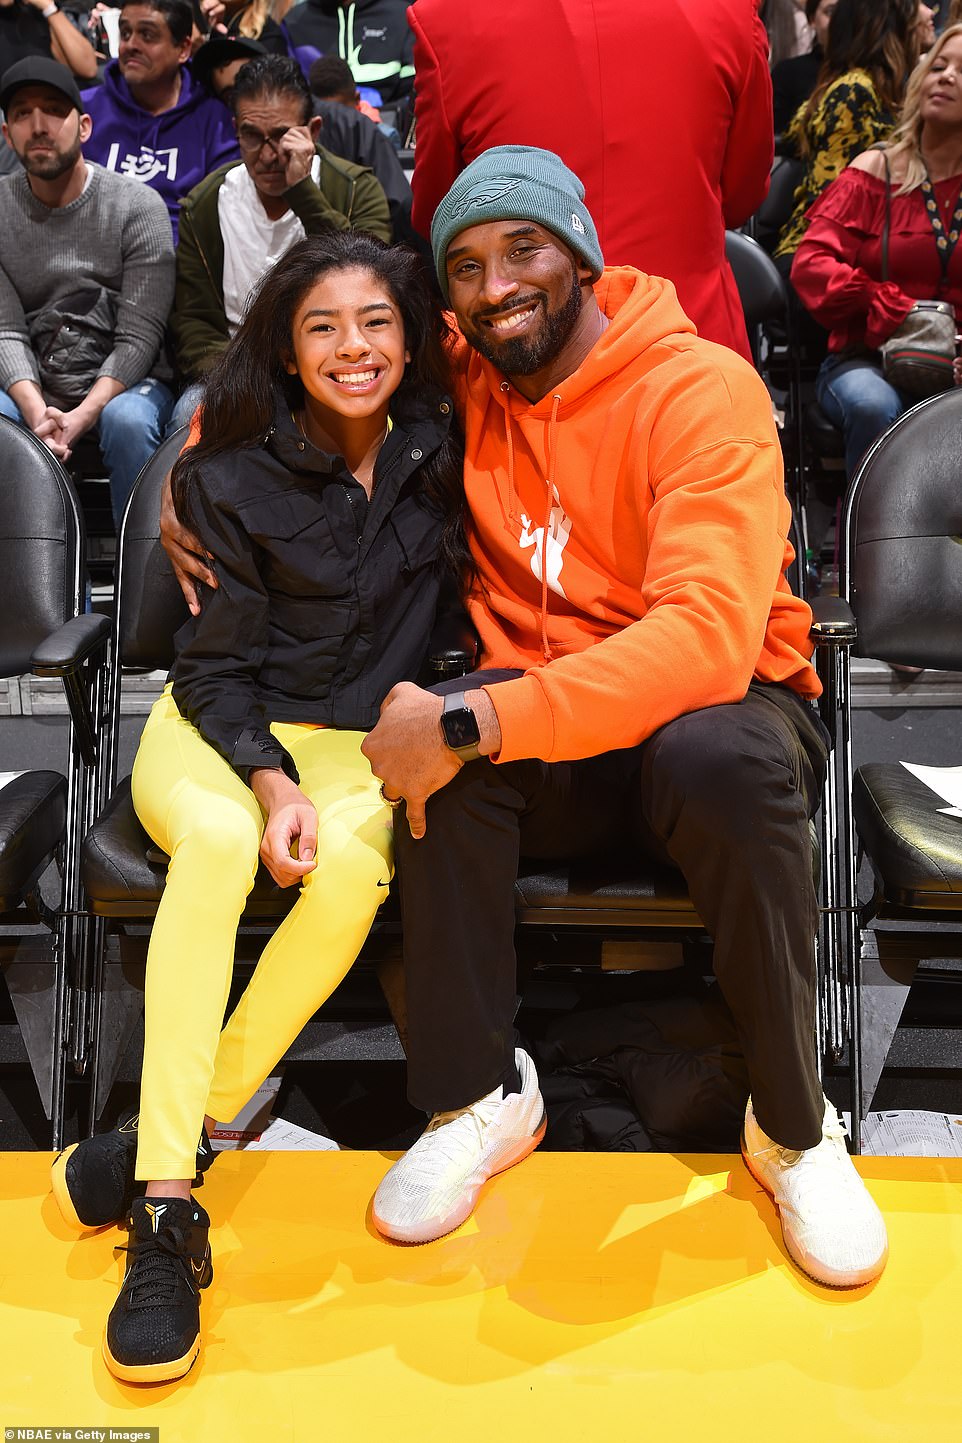 23901616-7931909-Kobe_Bryant_his_13_year_old_daughter_Gianna_pictured_together_in-a-116_1580073311118